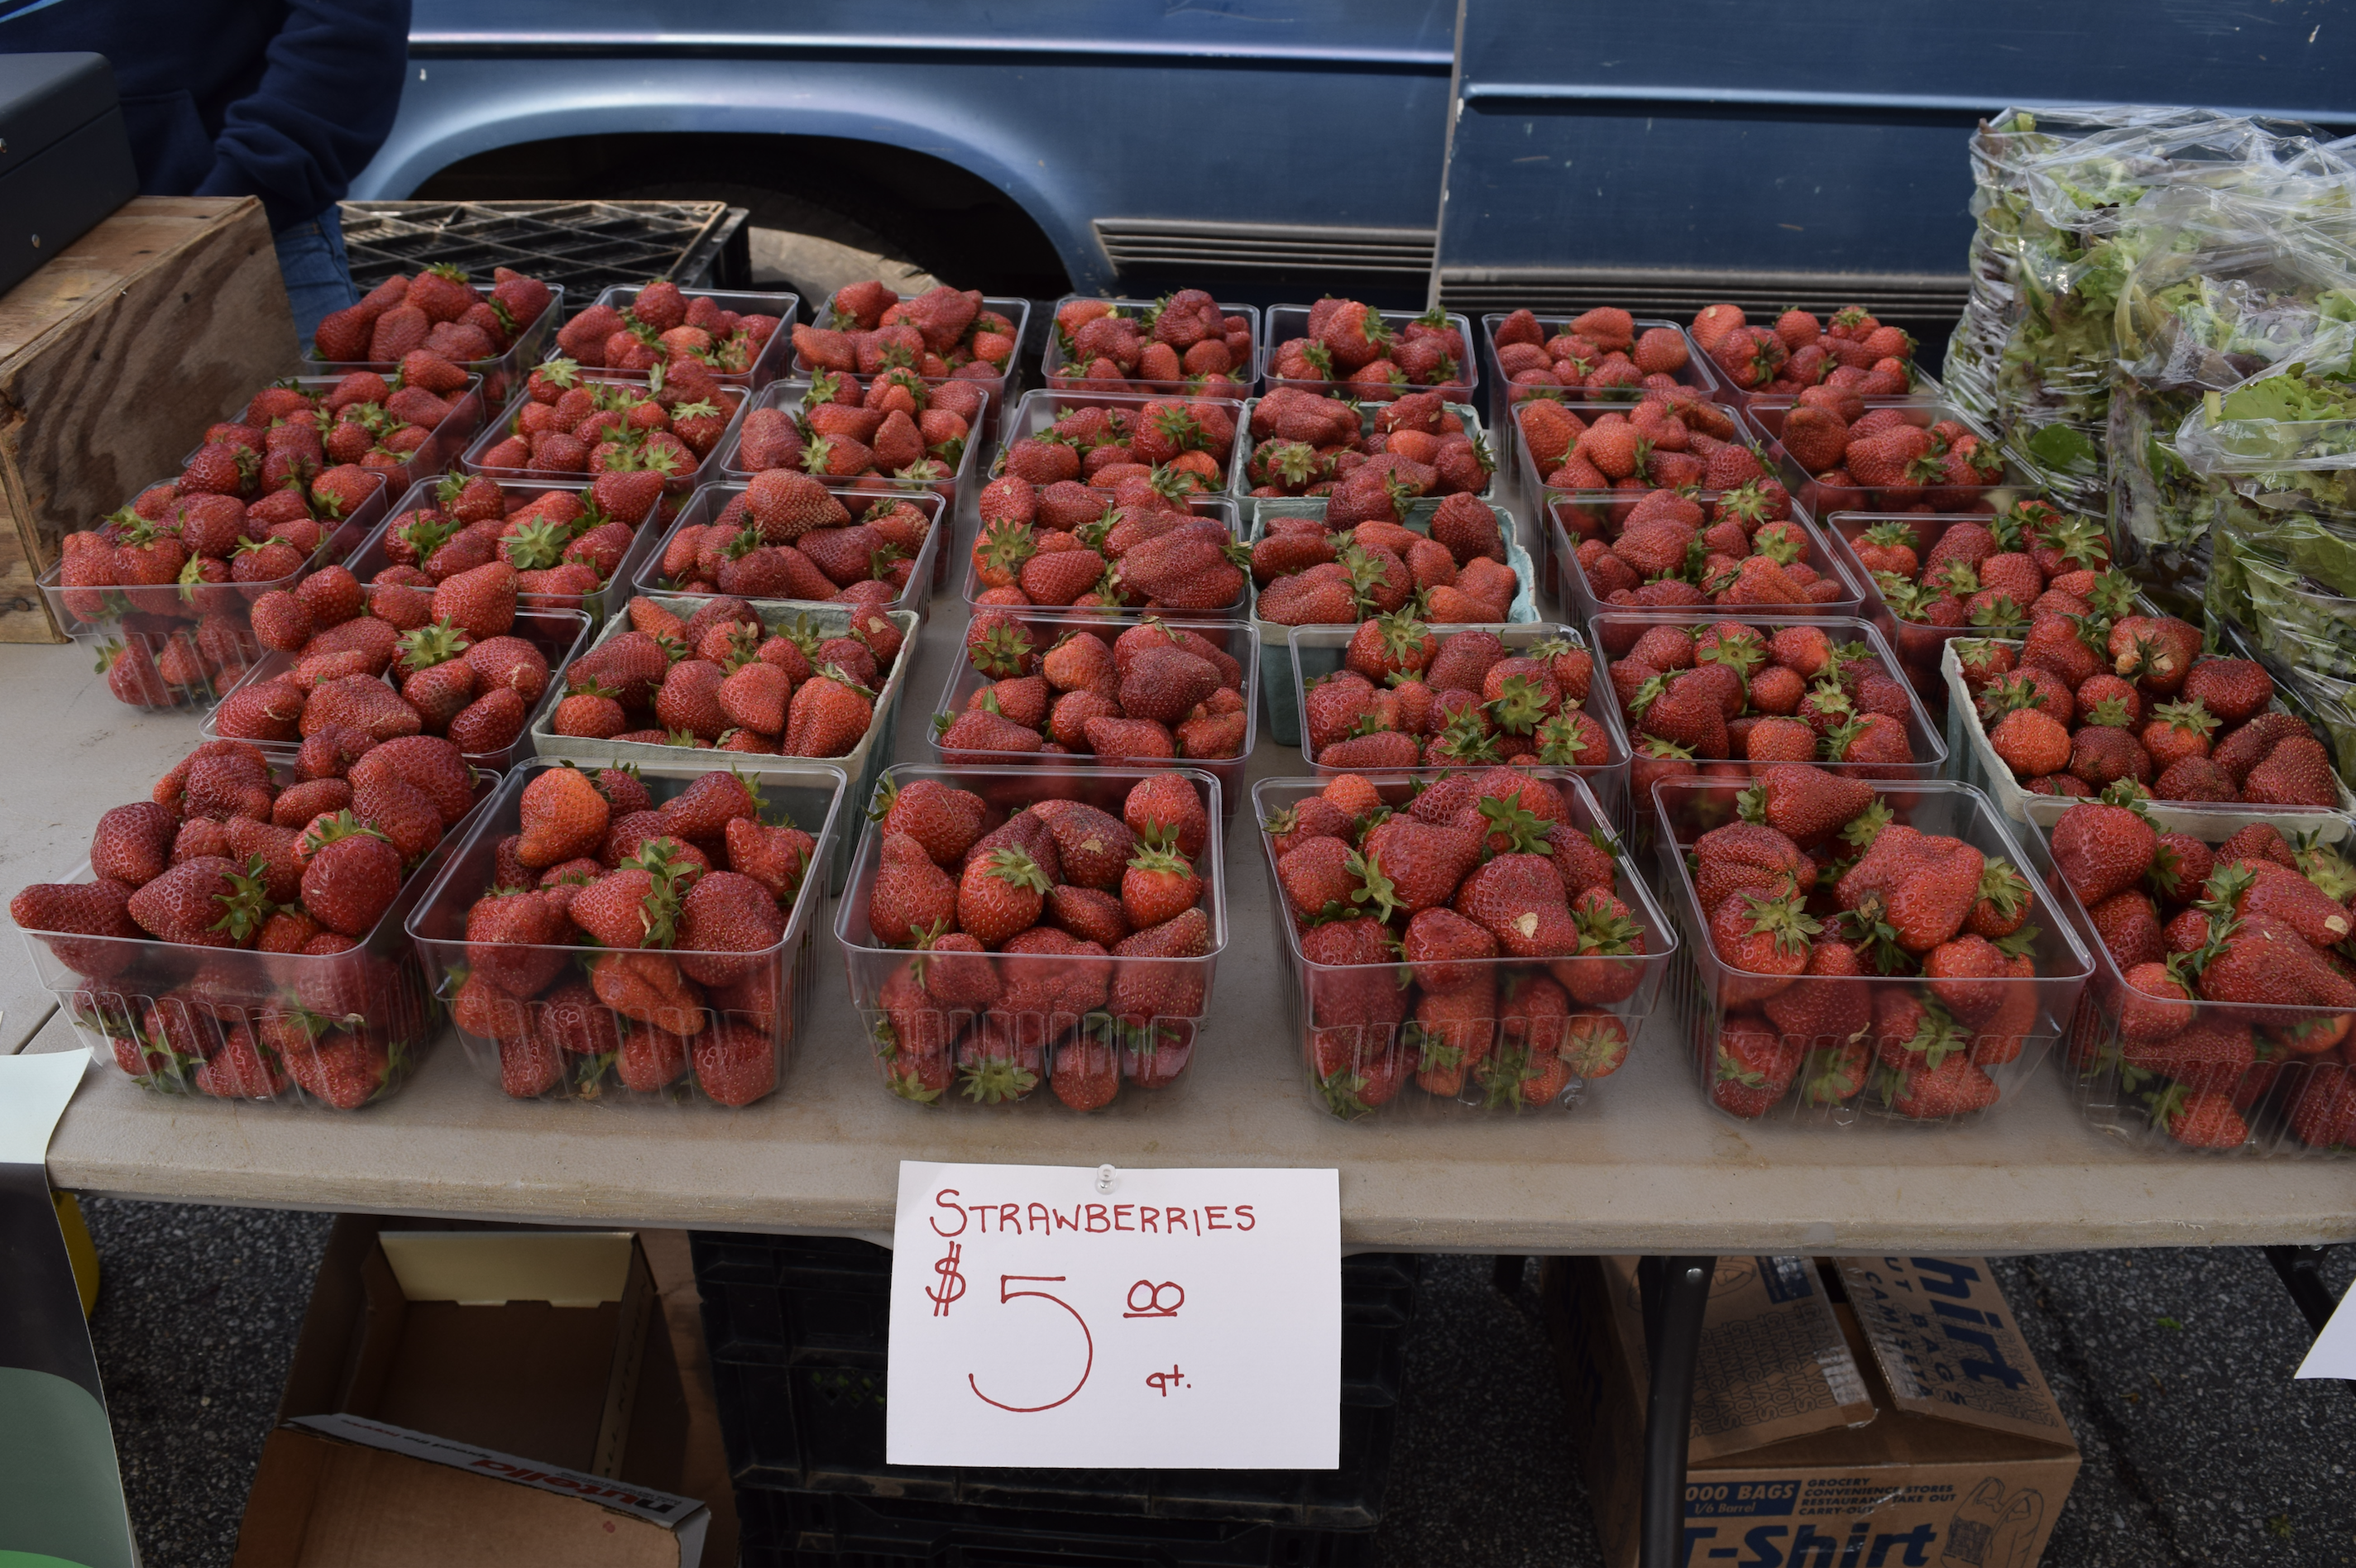 Fresh fruits and produce found at the farmers market in Woodbridge, Virginia - The Market at Potomac Mills